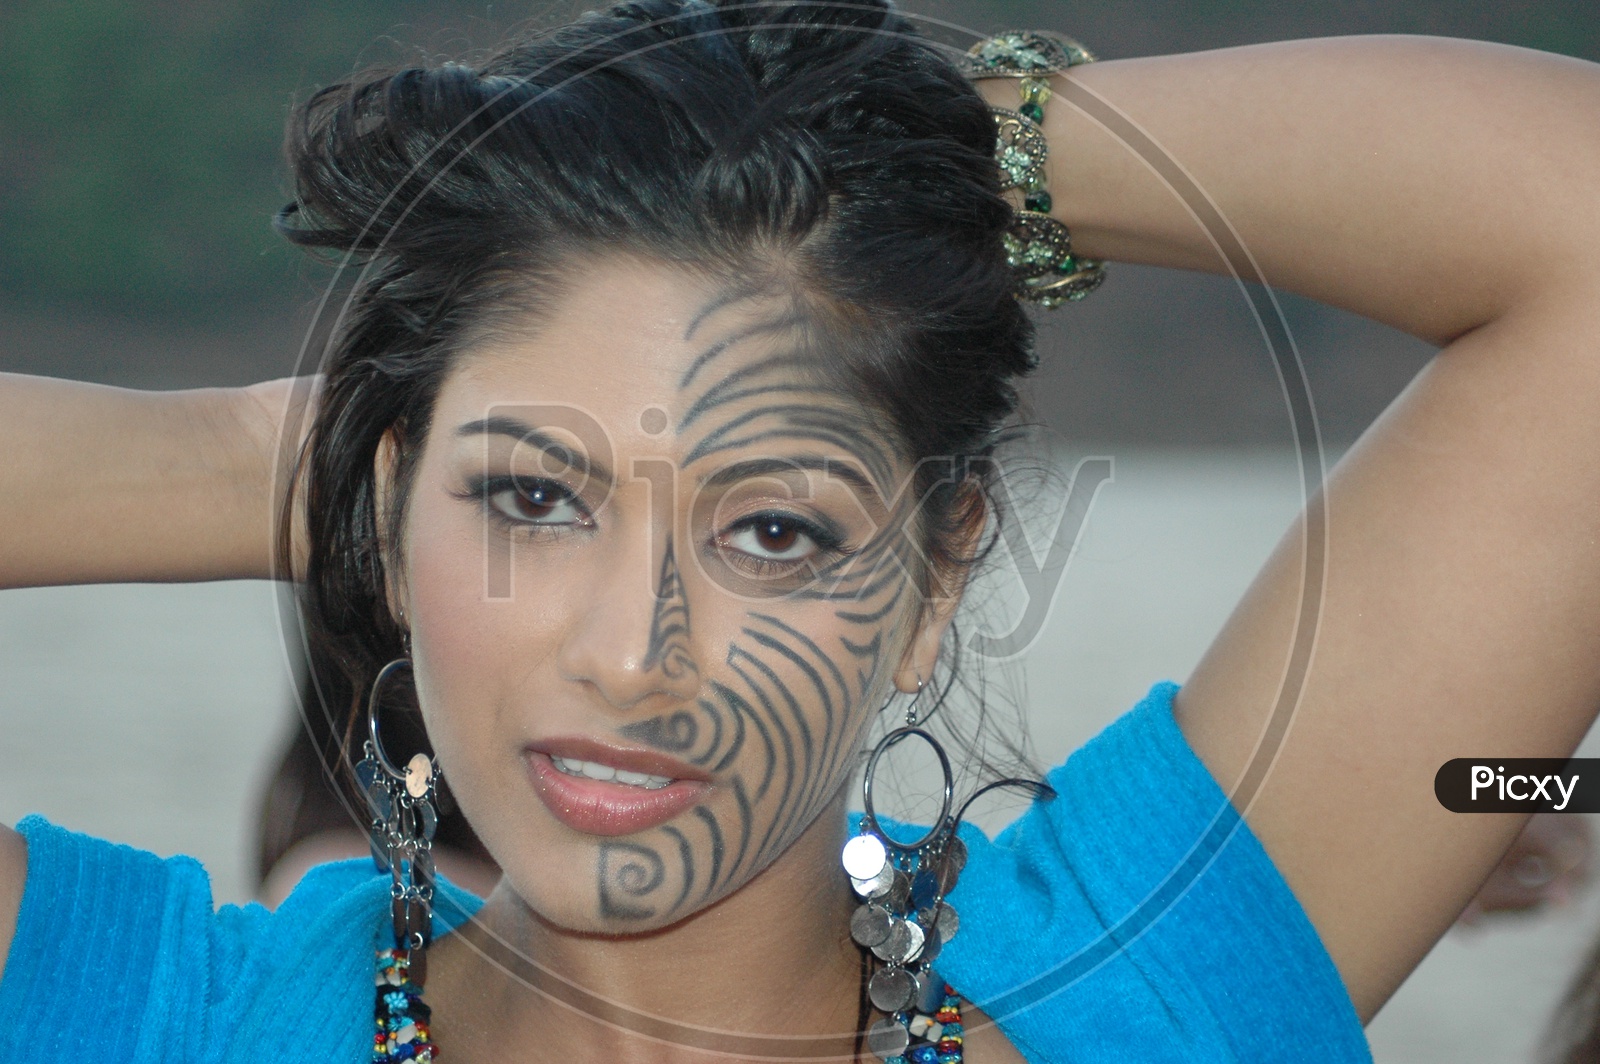 Young Indian Woman with Painting on her Face